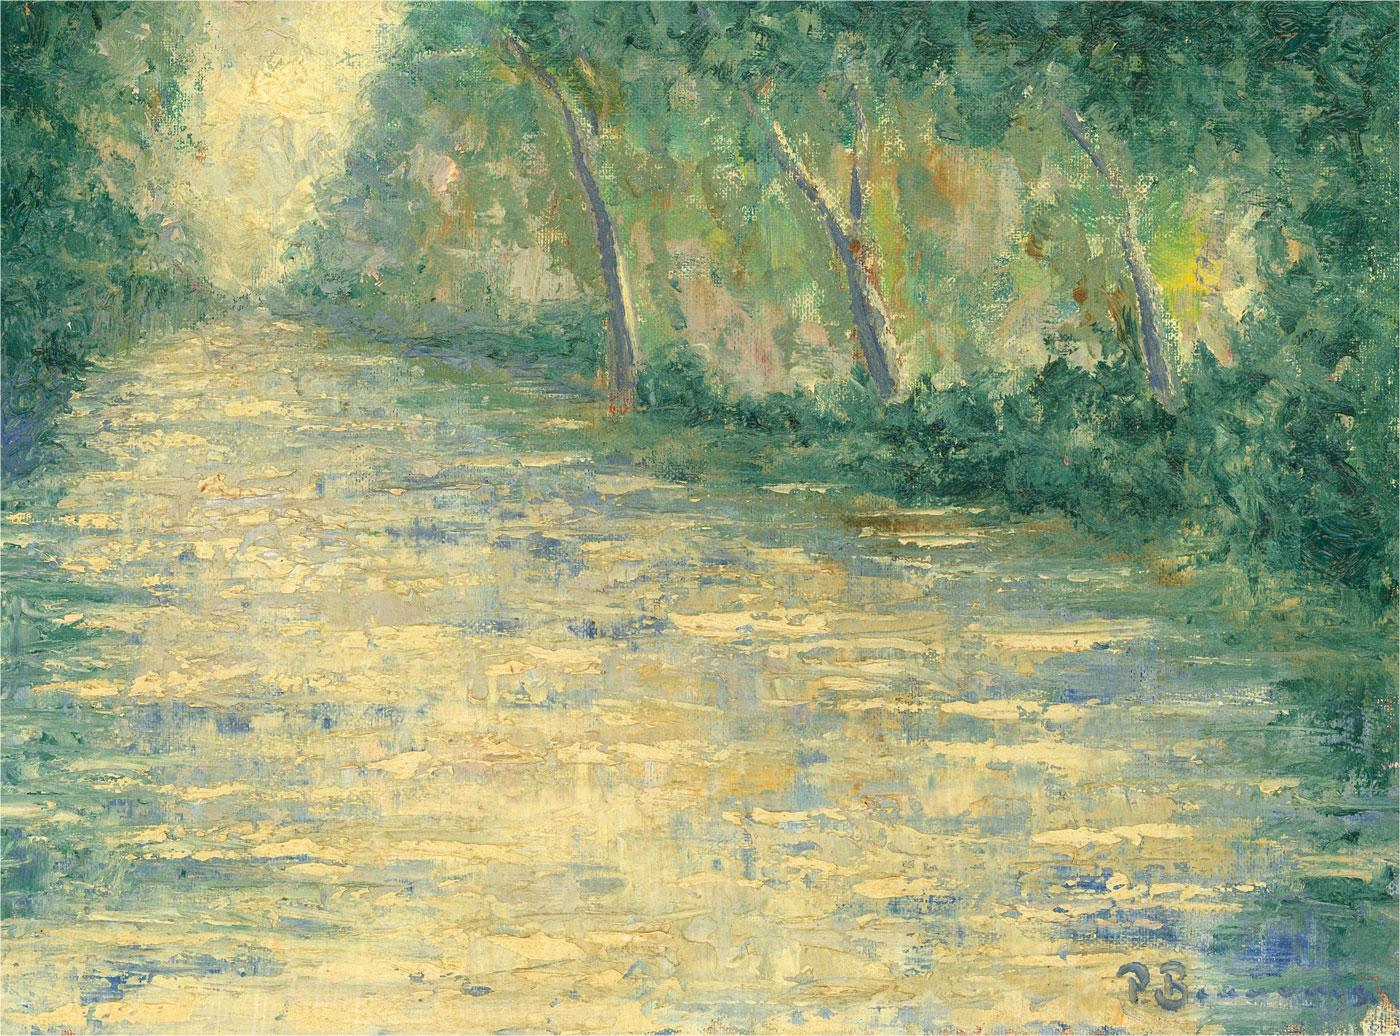 A fine oil painting by the artist Paul Beauvais, depicting a river scene with trees. With clear influences from the Impressionism, this composition highlight the artist's clear proficiency in the subject and medium. Signed to the lower right-hand